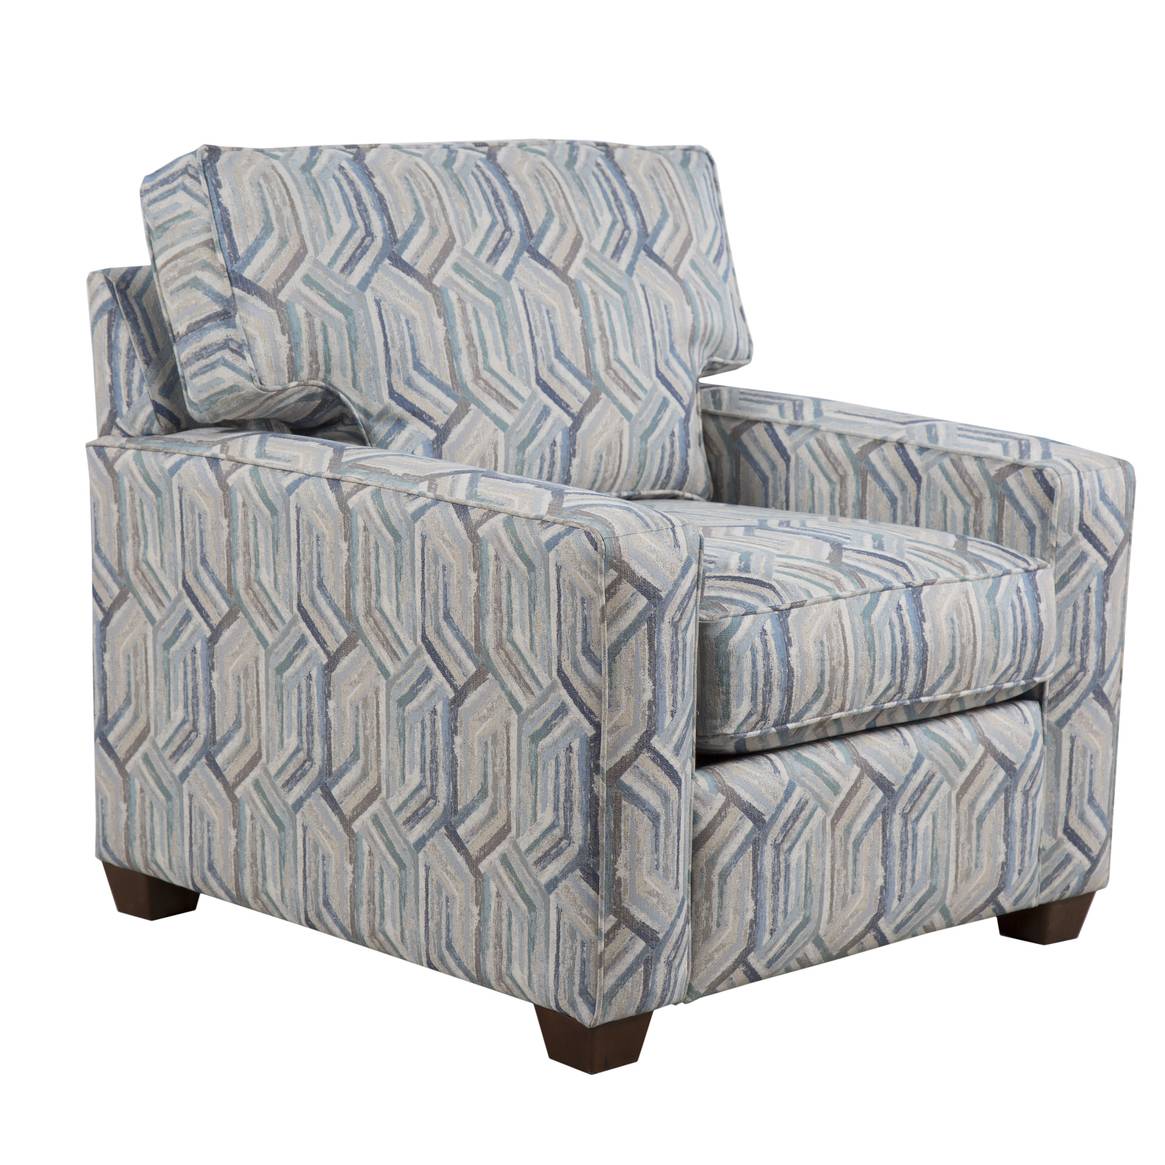 C145 CHAIR FROM CAPRIS FURNITURE